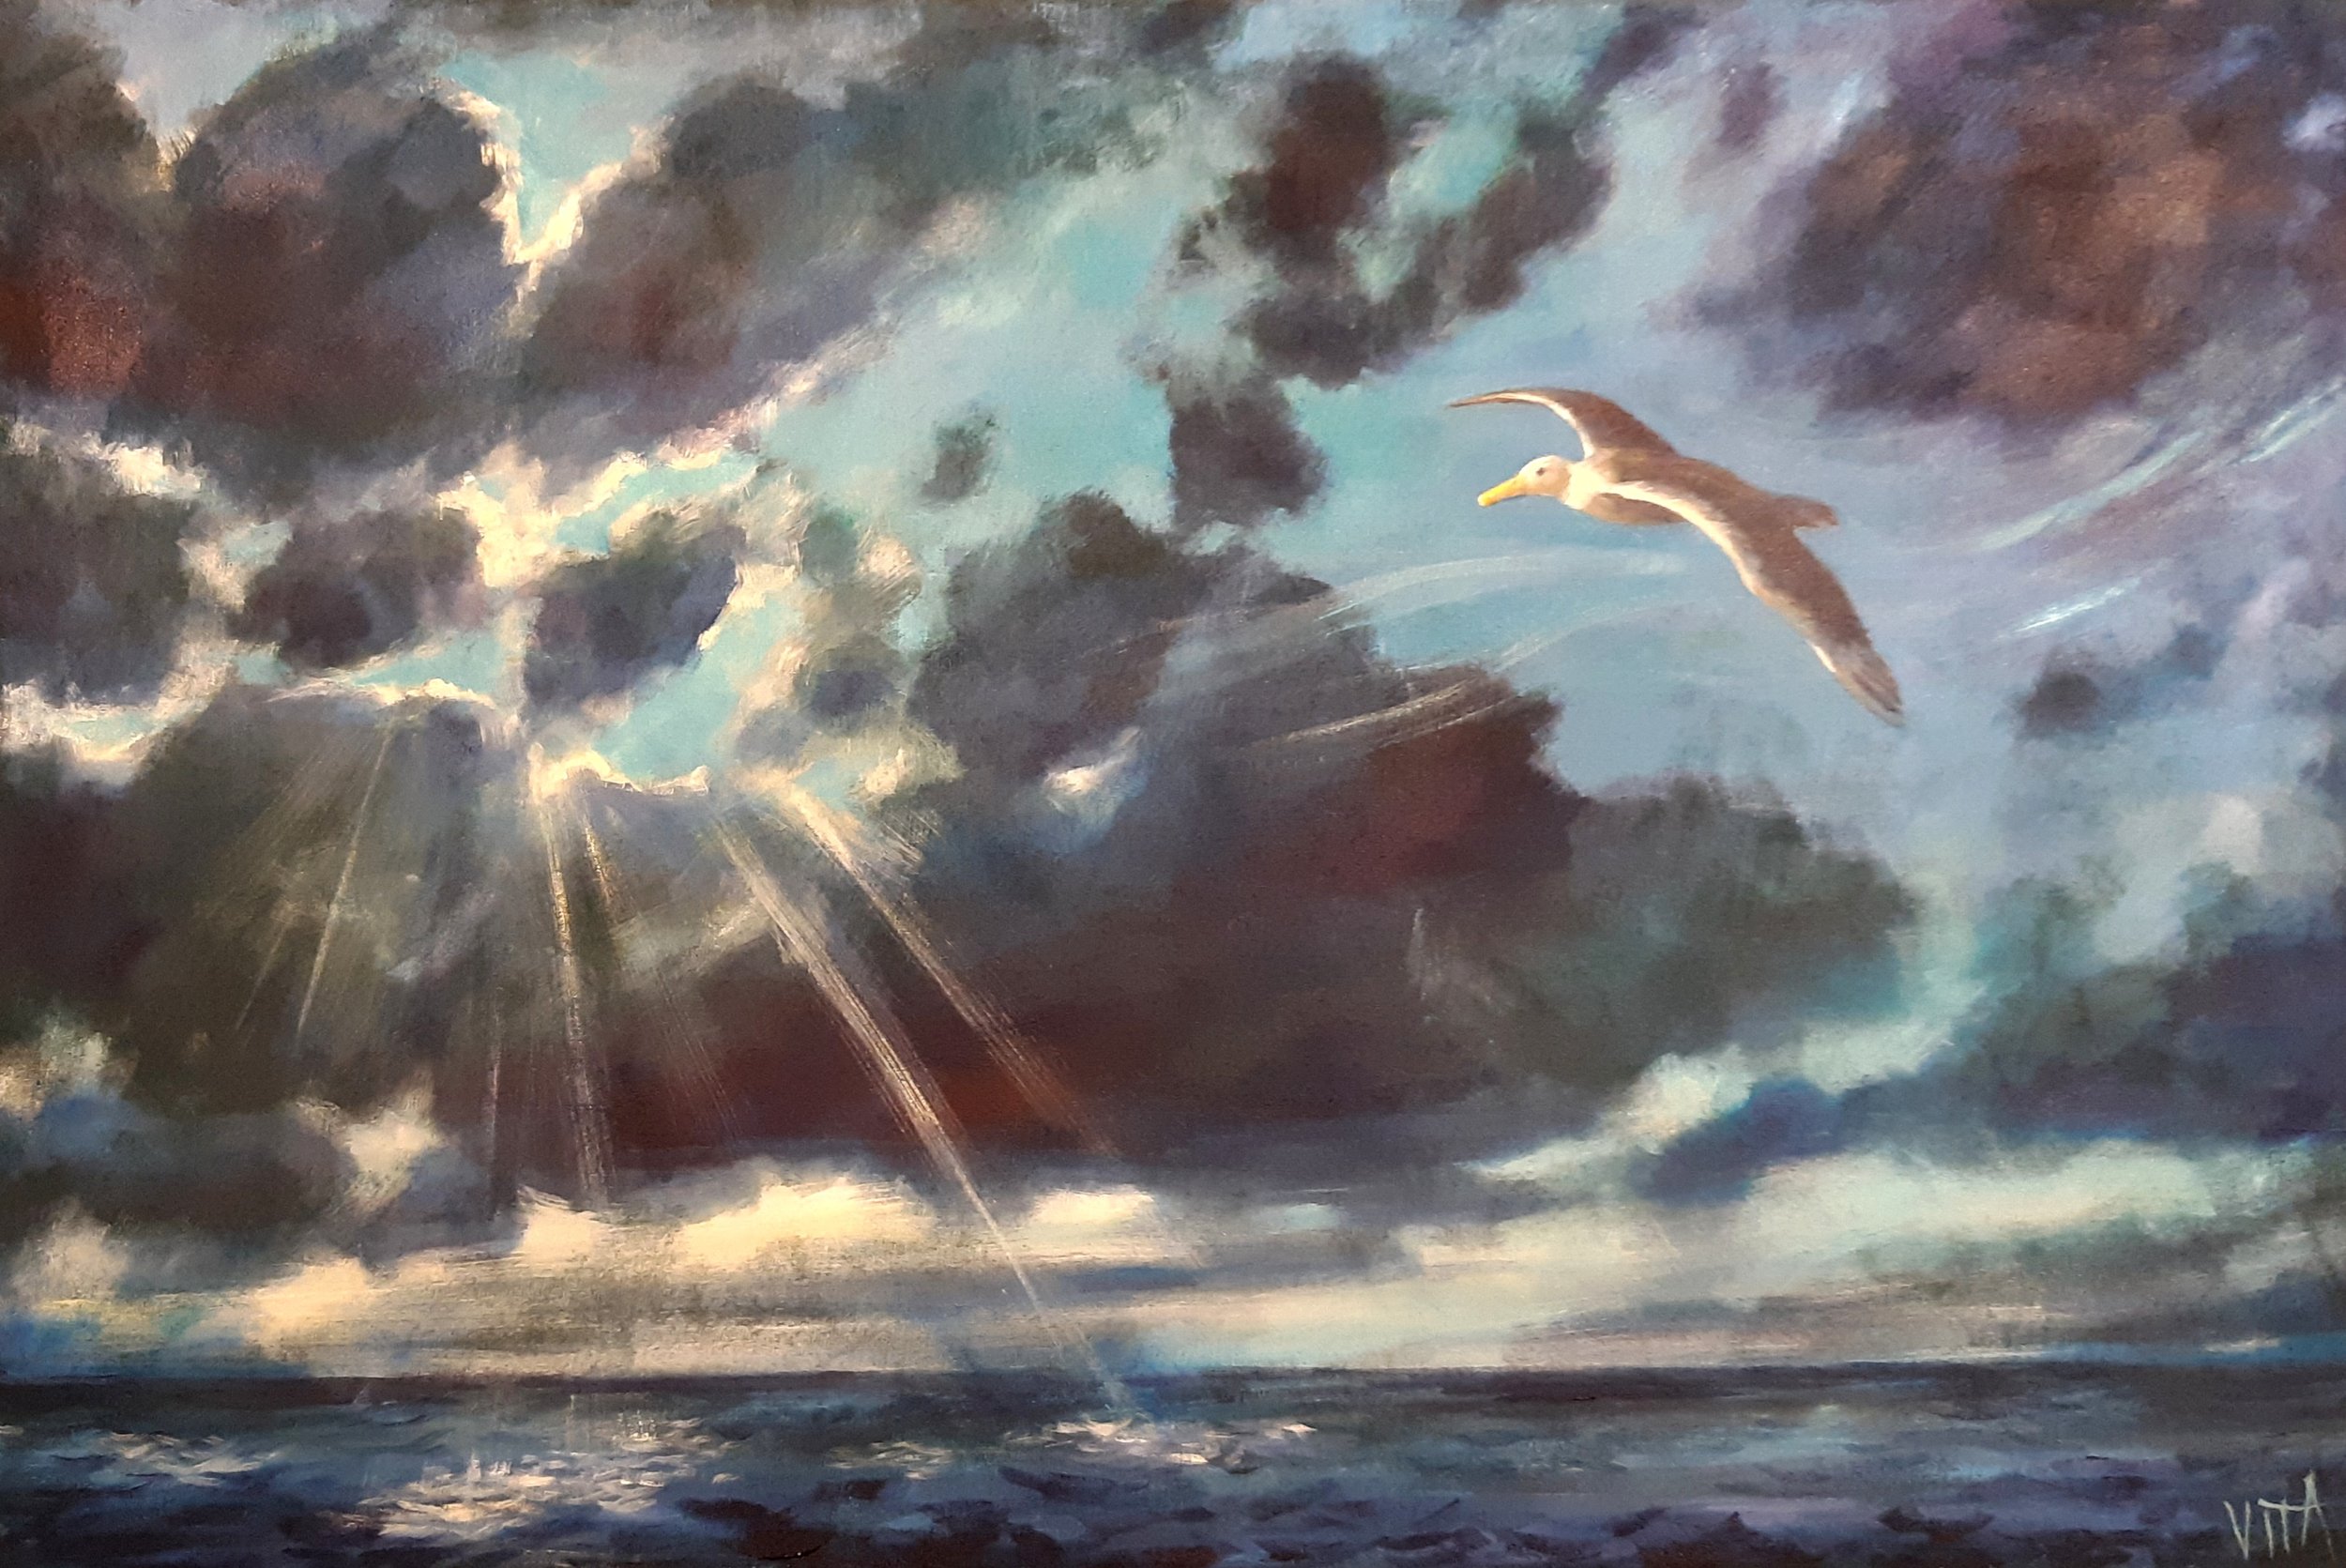 SOLD, Albatross in the Wind Painting, Acrylic on Canvas, Copyright 2021 Hirschten